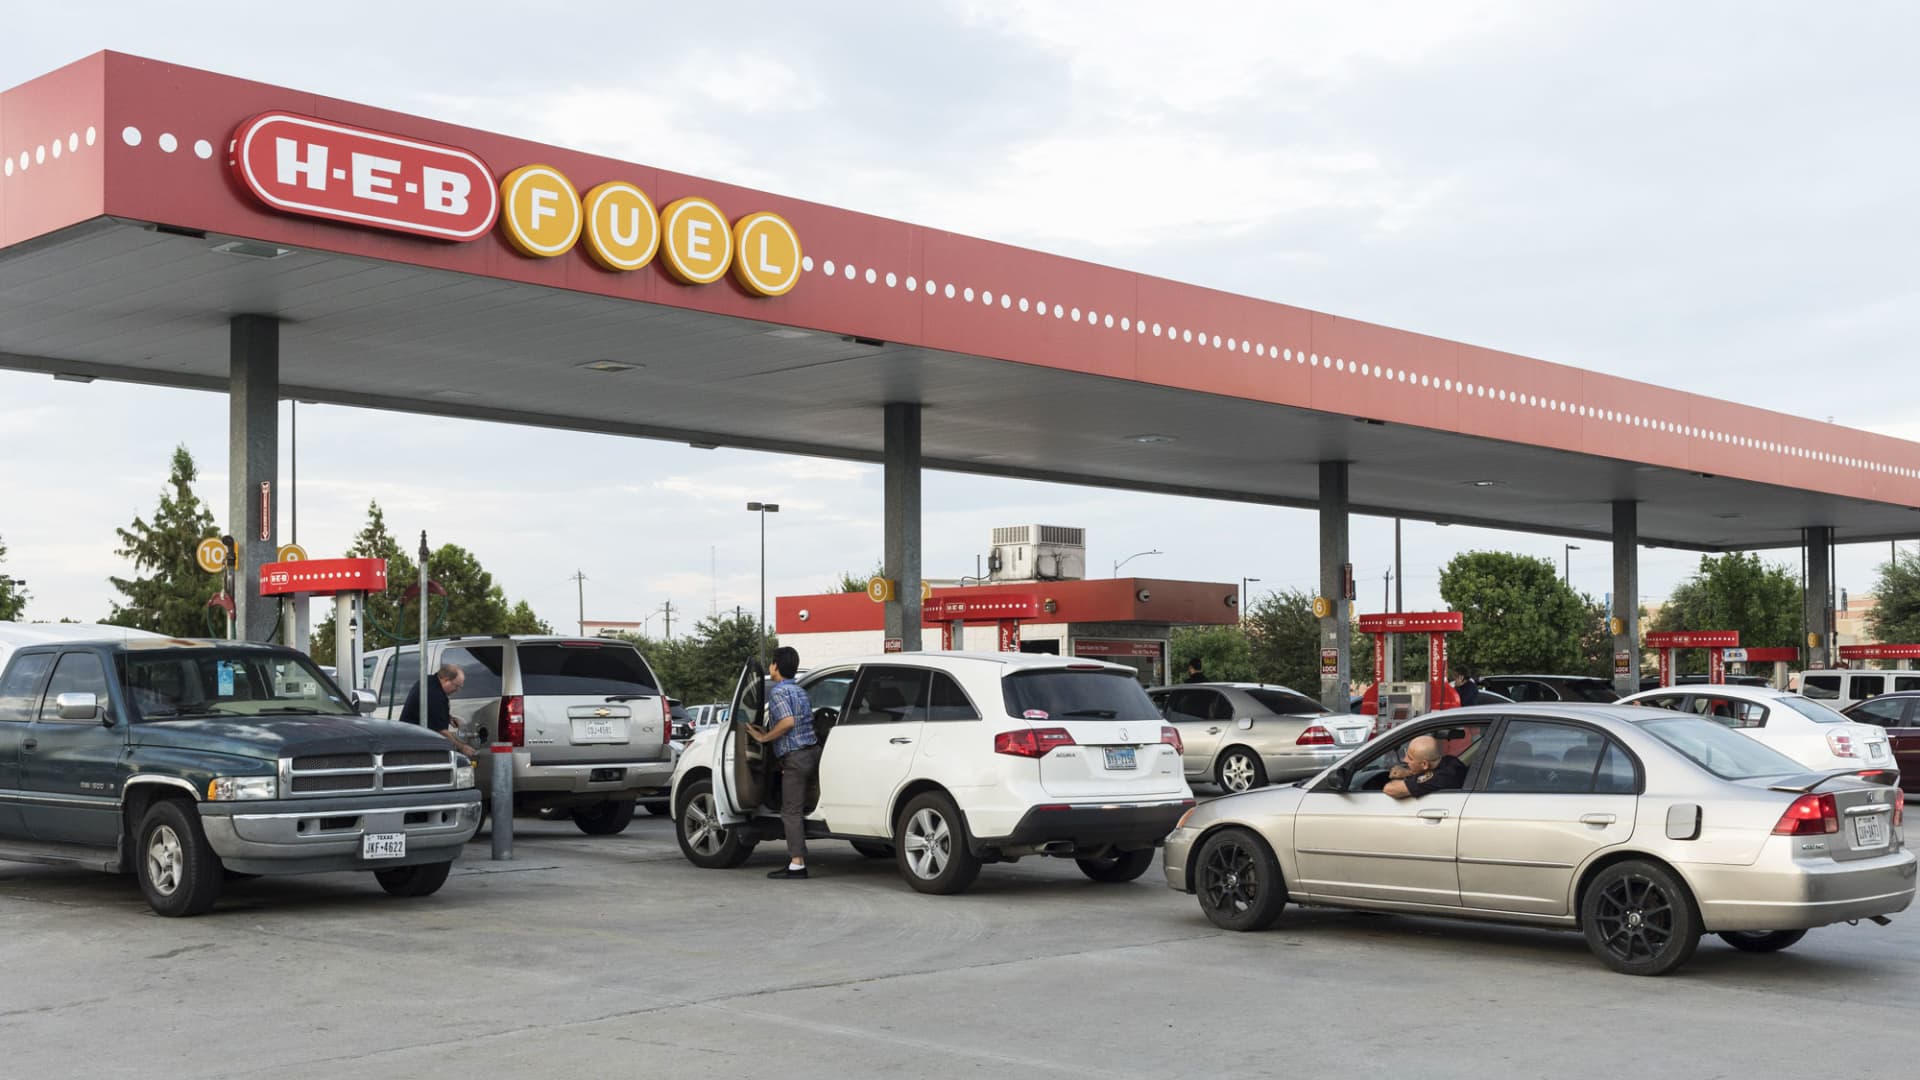 Customers wait in line to refuel at an HEB Fuel gas station in Houston, Texas, on Thursday, Aug. 24, 2017.